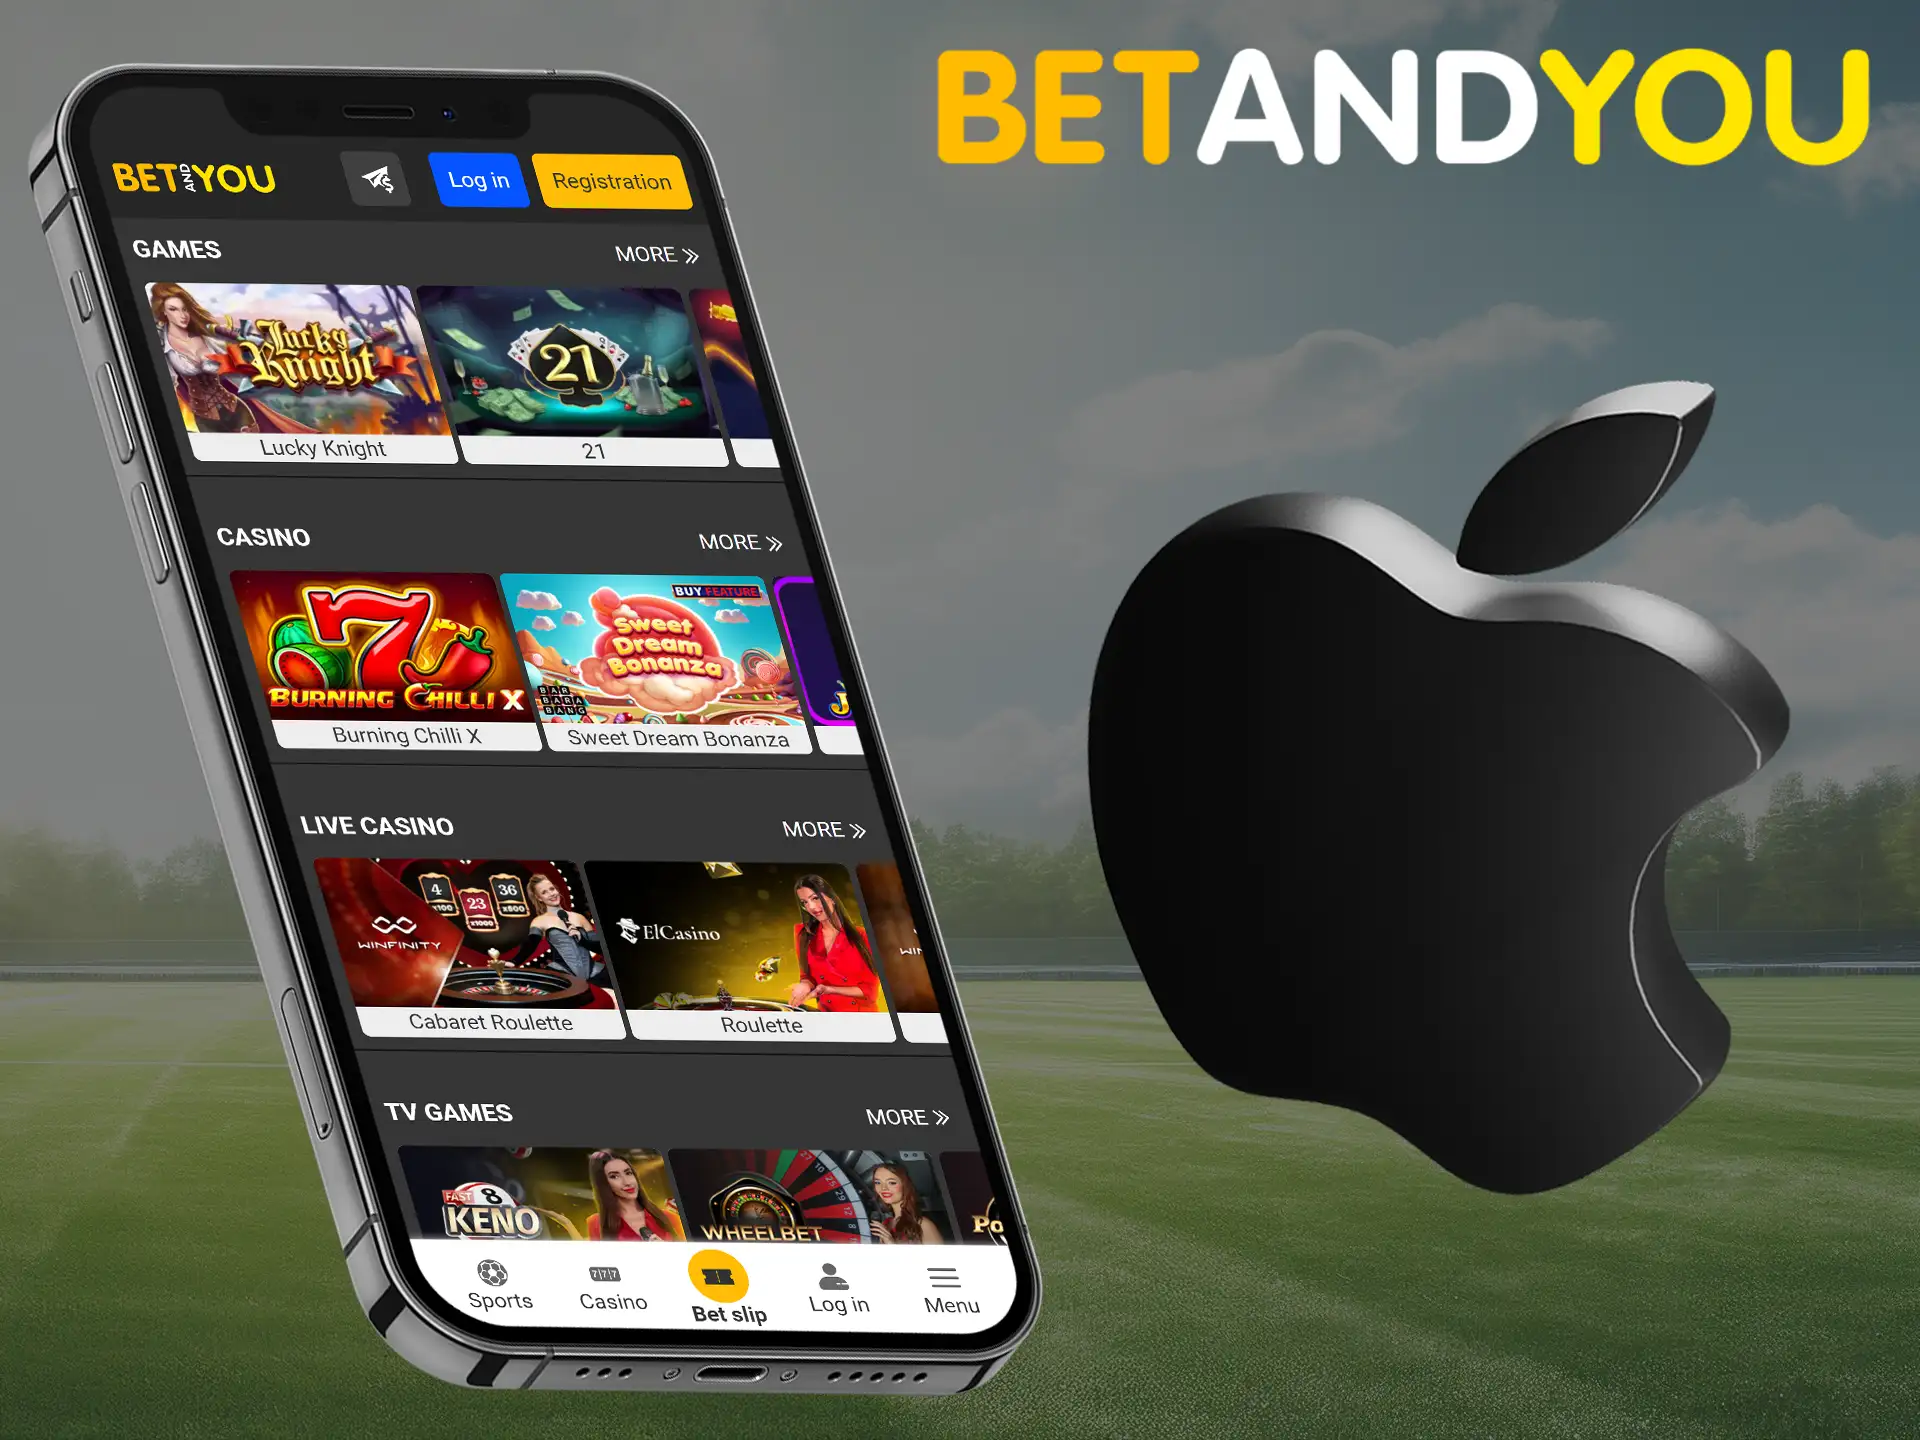 For members using iOS devices, the bookmaker company Betandyou has developed its own betting mobile application.